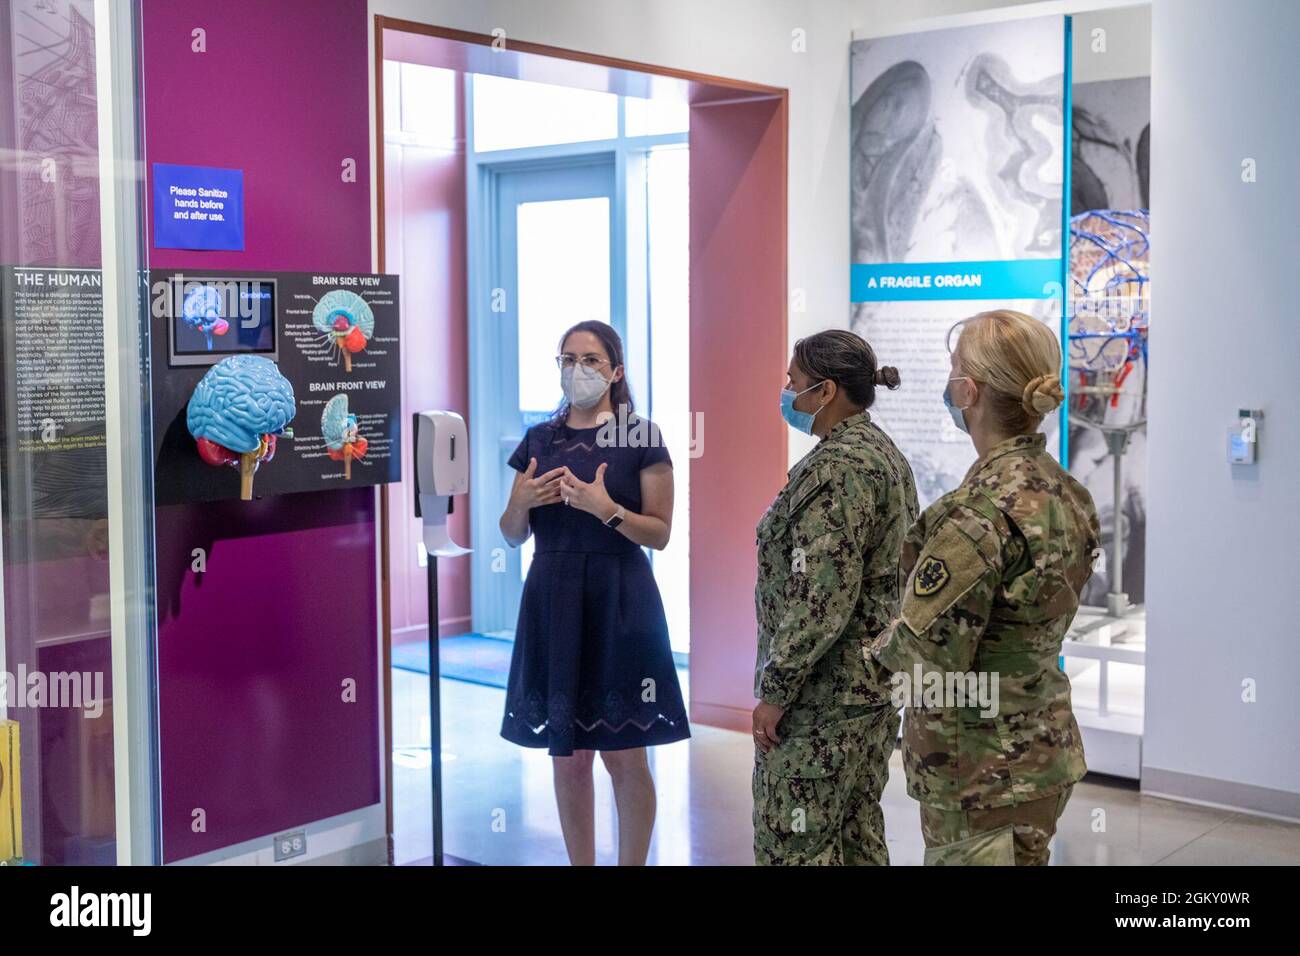 Description: Brig. Gen. Katherine Simonson 2021 Tour     Caption: Gwen Nelmes (left), Education Coordinator at the National Museum of Health and Medicine, provides a tour of the public galleries to Brig. Gen. Katherine Simonson (far right), Deputy Assistant Director, Research and Development Directorate, Defense Health Agency, and her staff on July 22, 2021, at the museum in Silver Spring, Maryland. (Disclosure: This image has been cropped to emphasize the subject.) Stock Photo